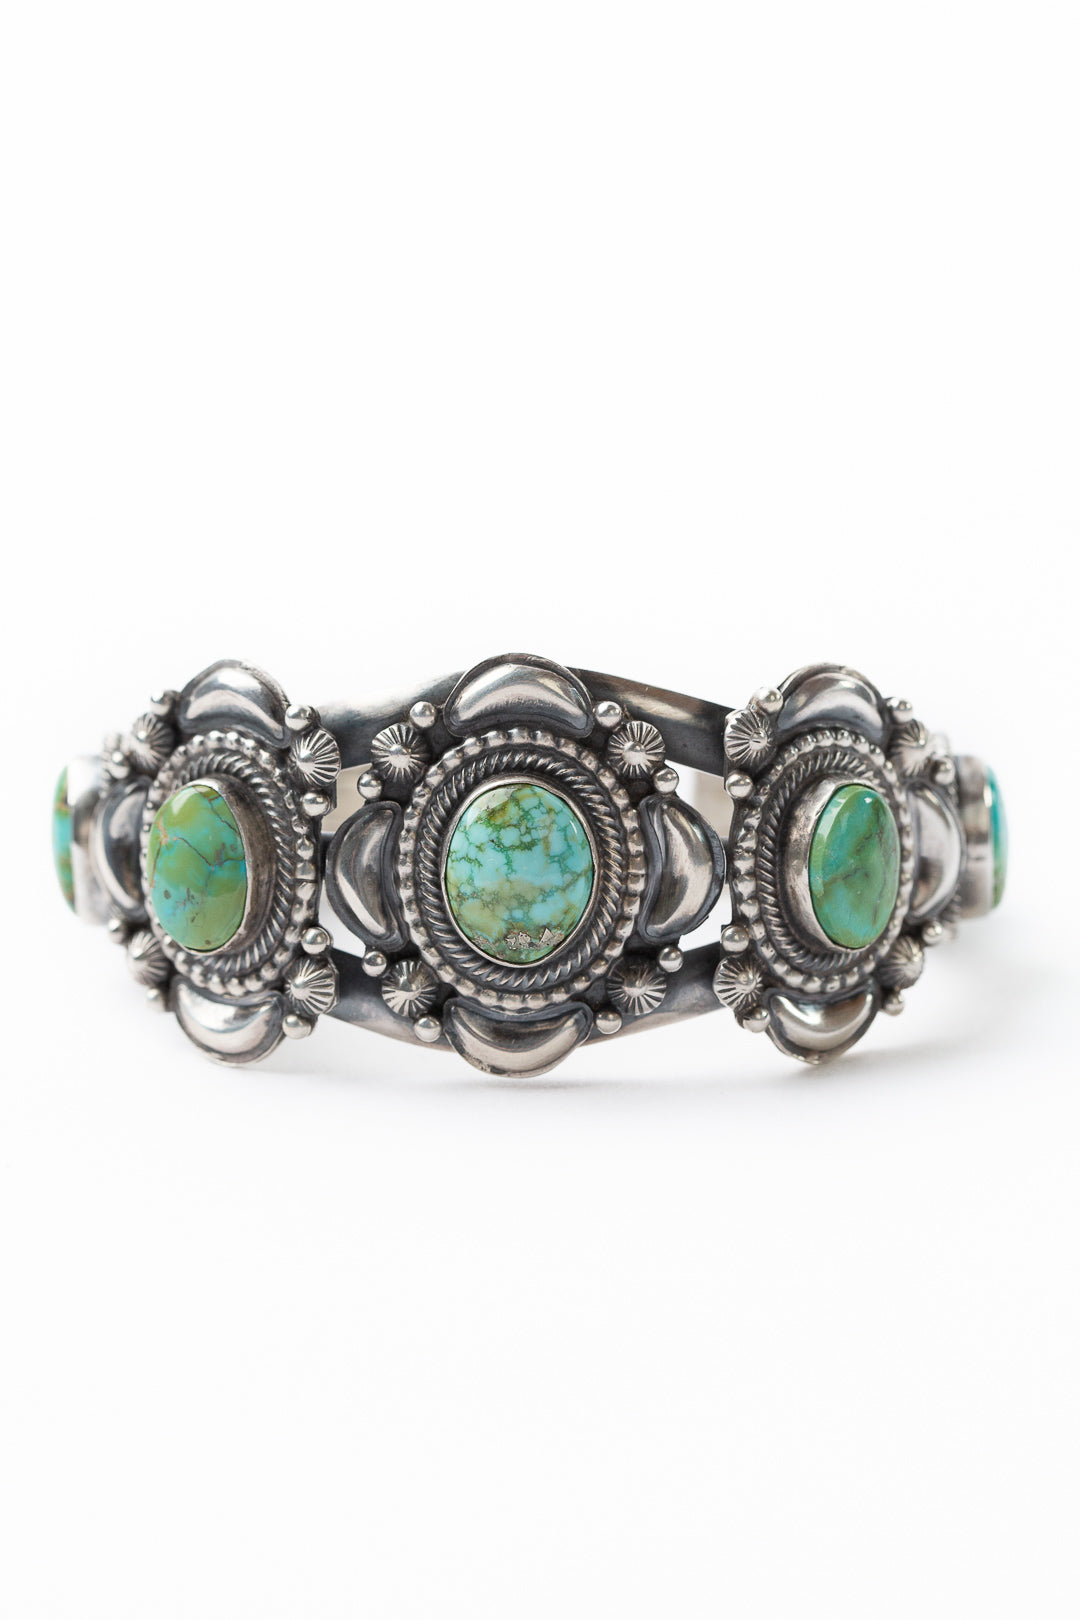 Tom Lewis Handcrafted Sonoran Turquoise Bracelet